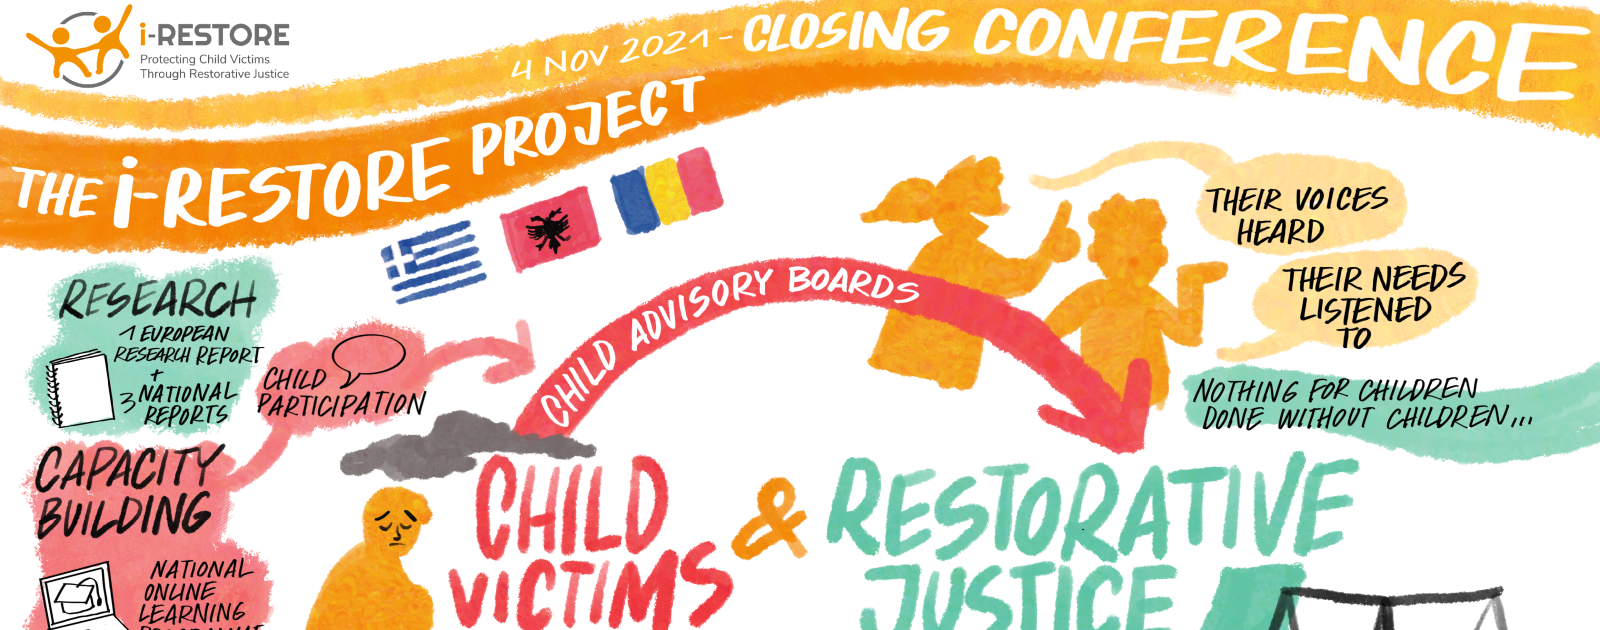 The journey so far and future steps: i-RESTORE closing conference focuses on child participation to increase access to restorative justice